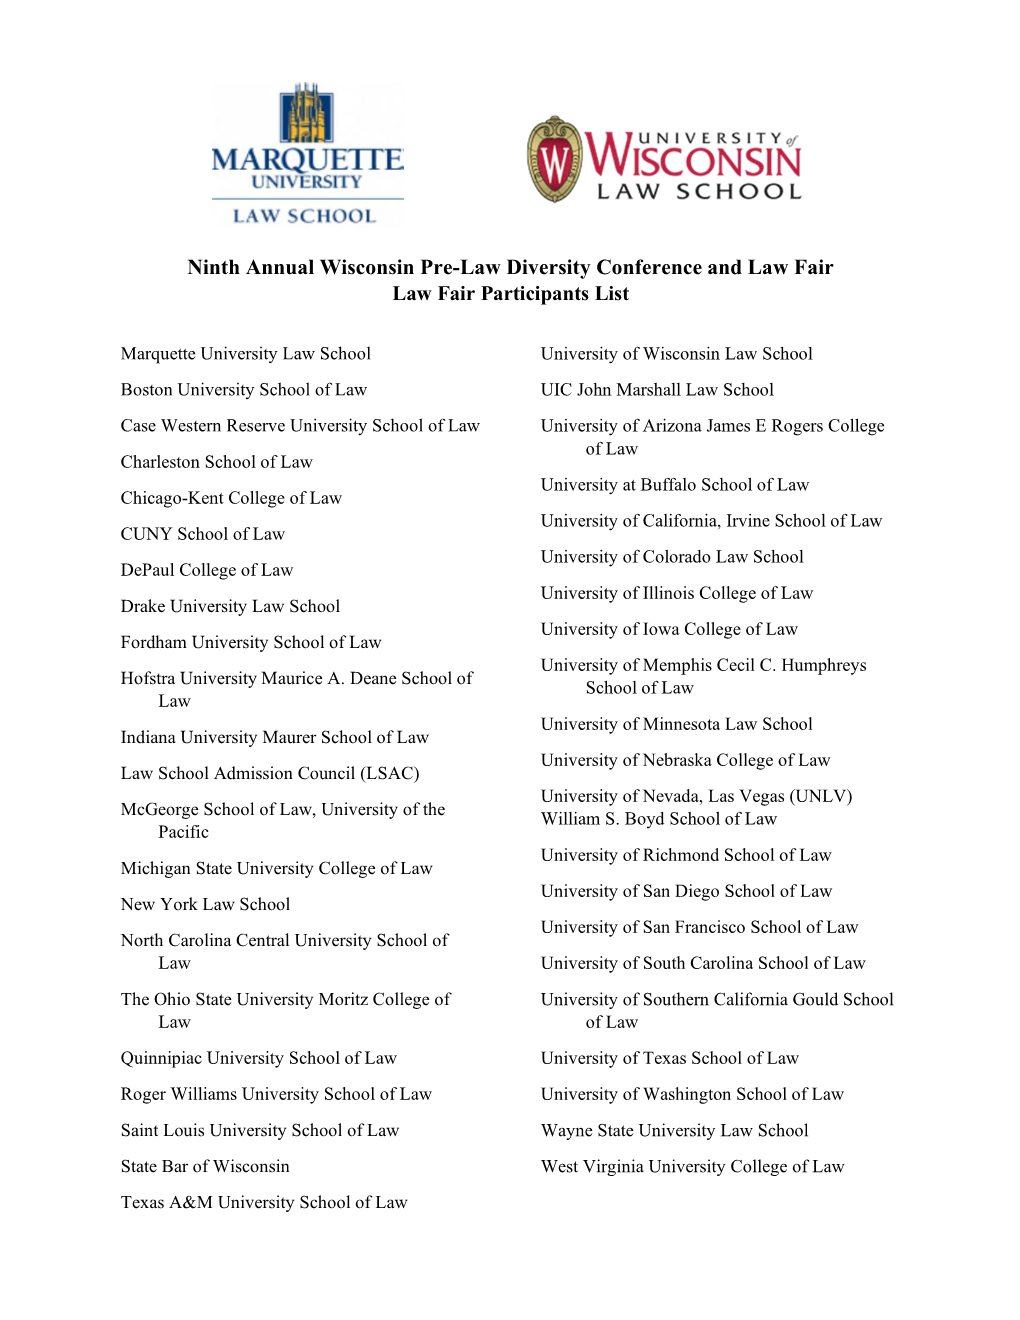 Ninth Annual Wisconsin Pre-Law Diversity Conference and Law Fair Law Fair Participants List